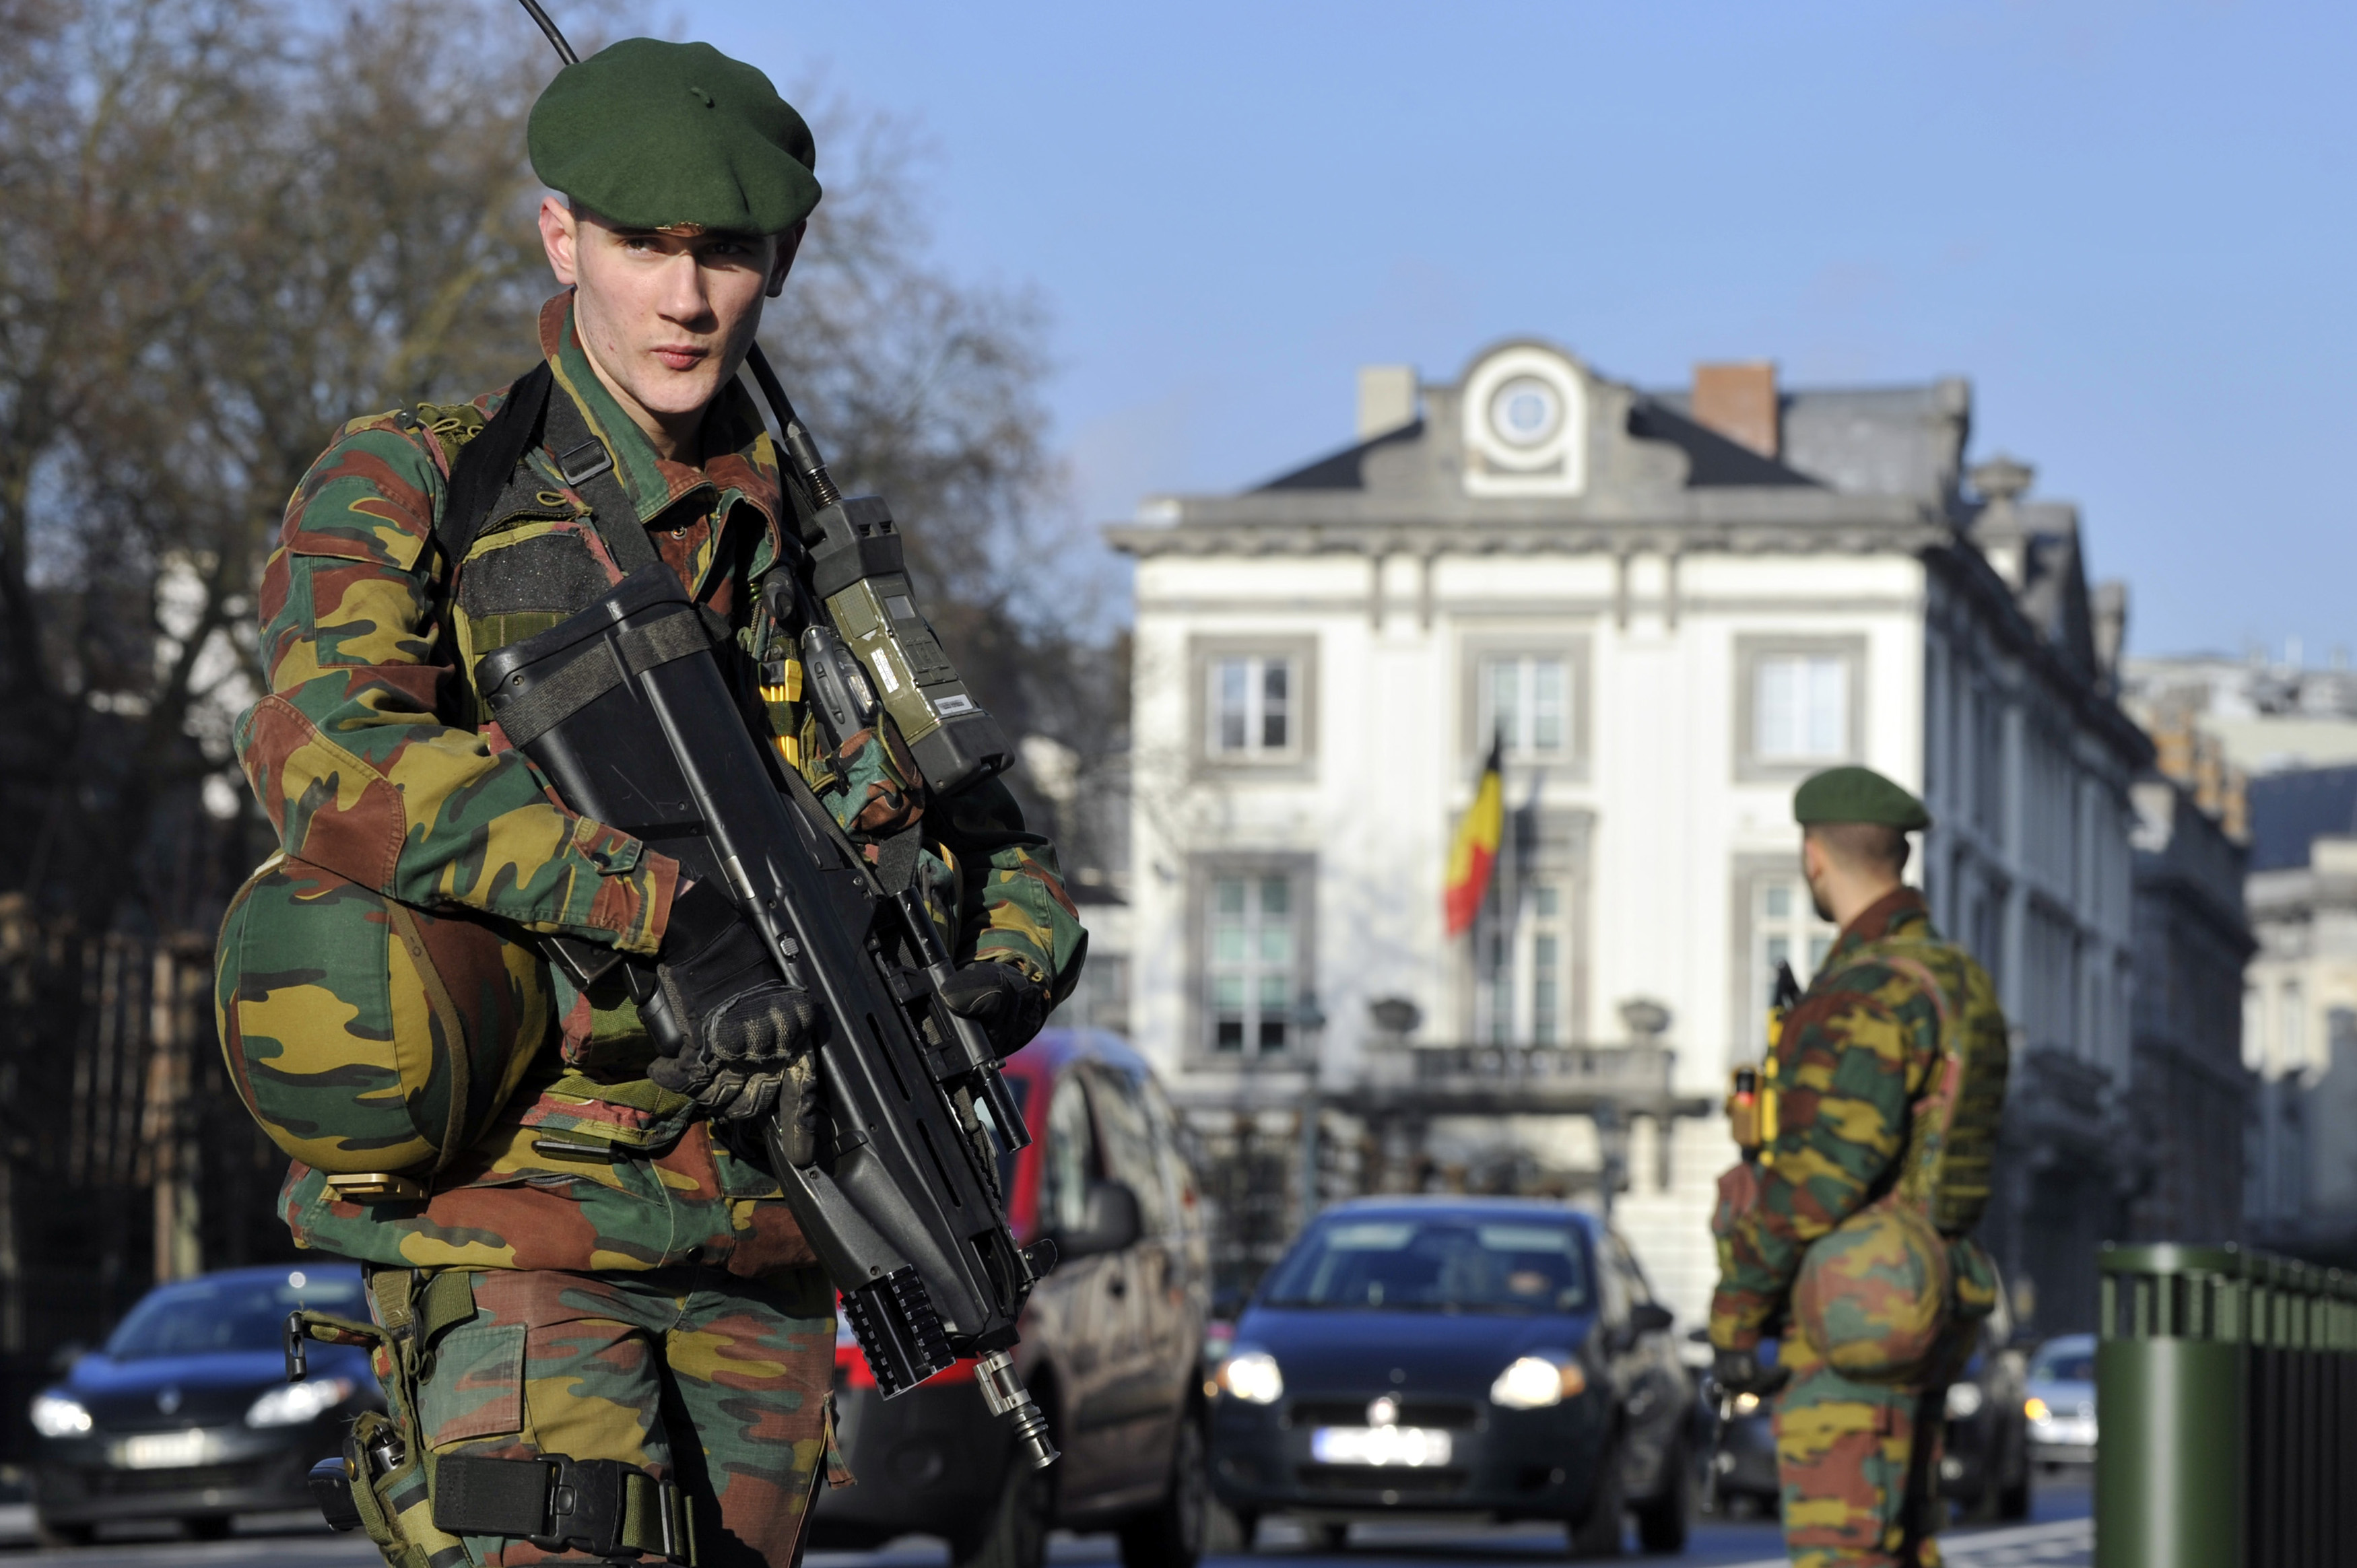 Belgian soldiers guard outside the U.S. Embassy in Brussels near the Belgian Parliament on Jan. 17, 2015. (Eric Vidal—Reuters)